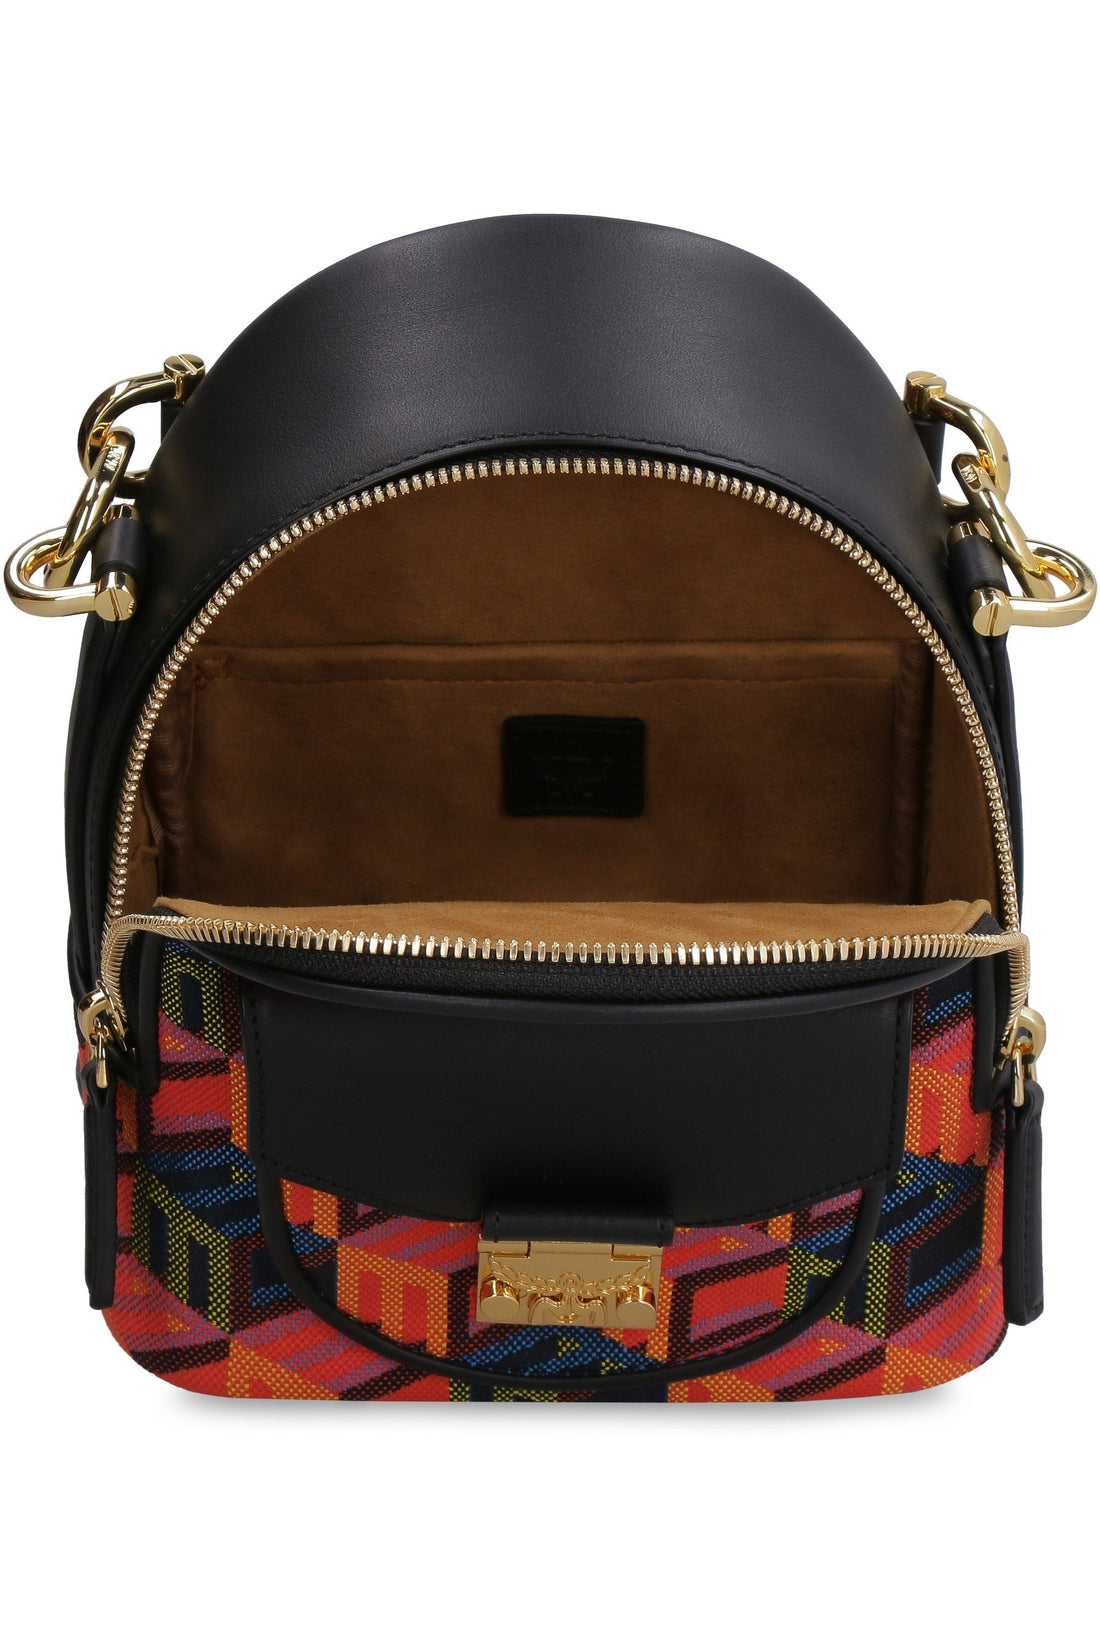 MCM-OUTLET-SALE-Patricia small convertible backpack-ARCHIVIST